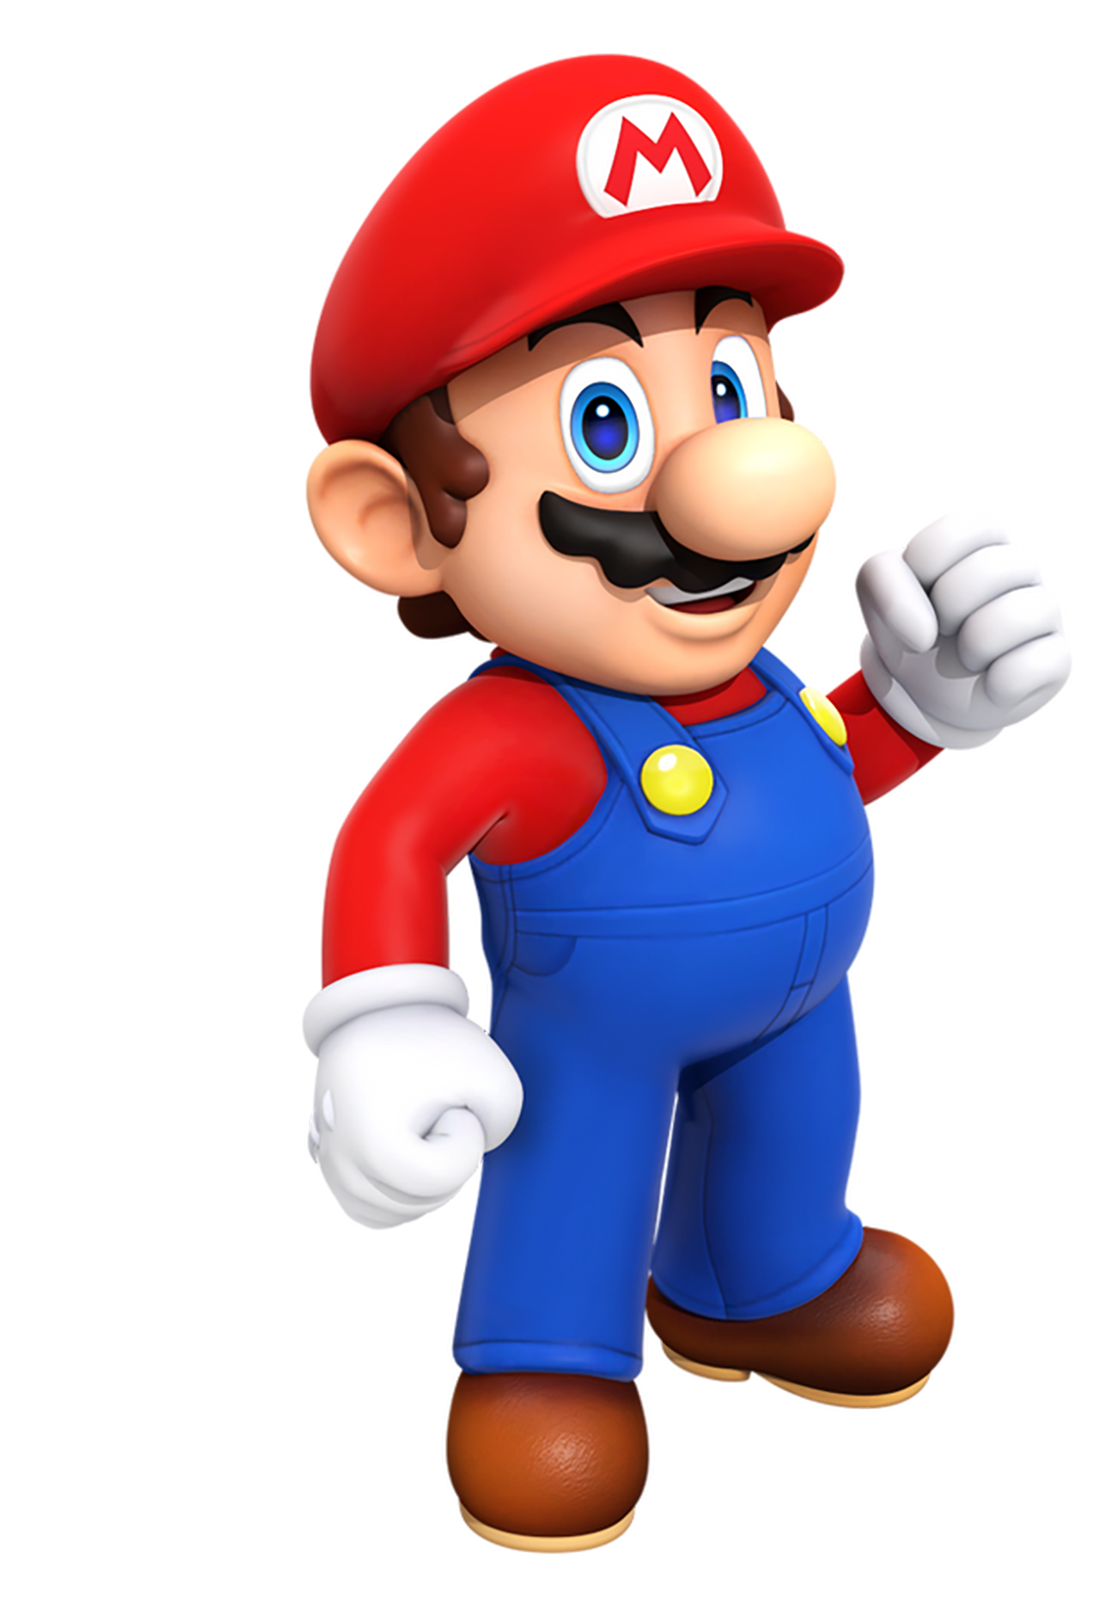 Mario from Super Mario Brothers